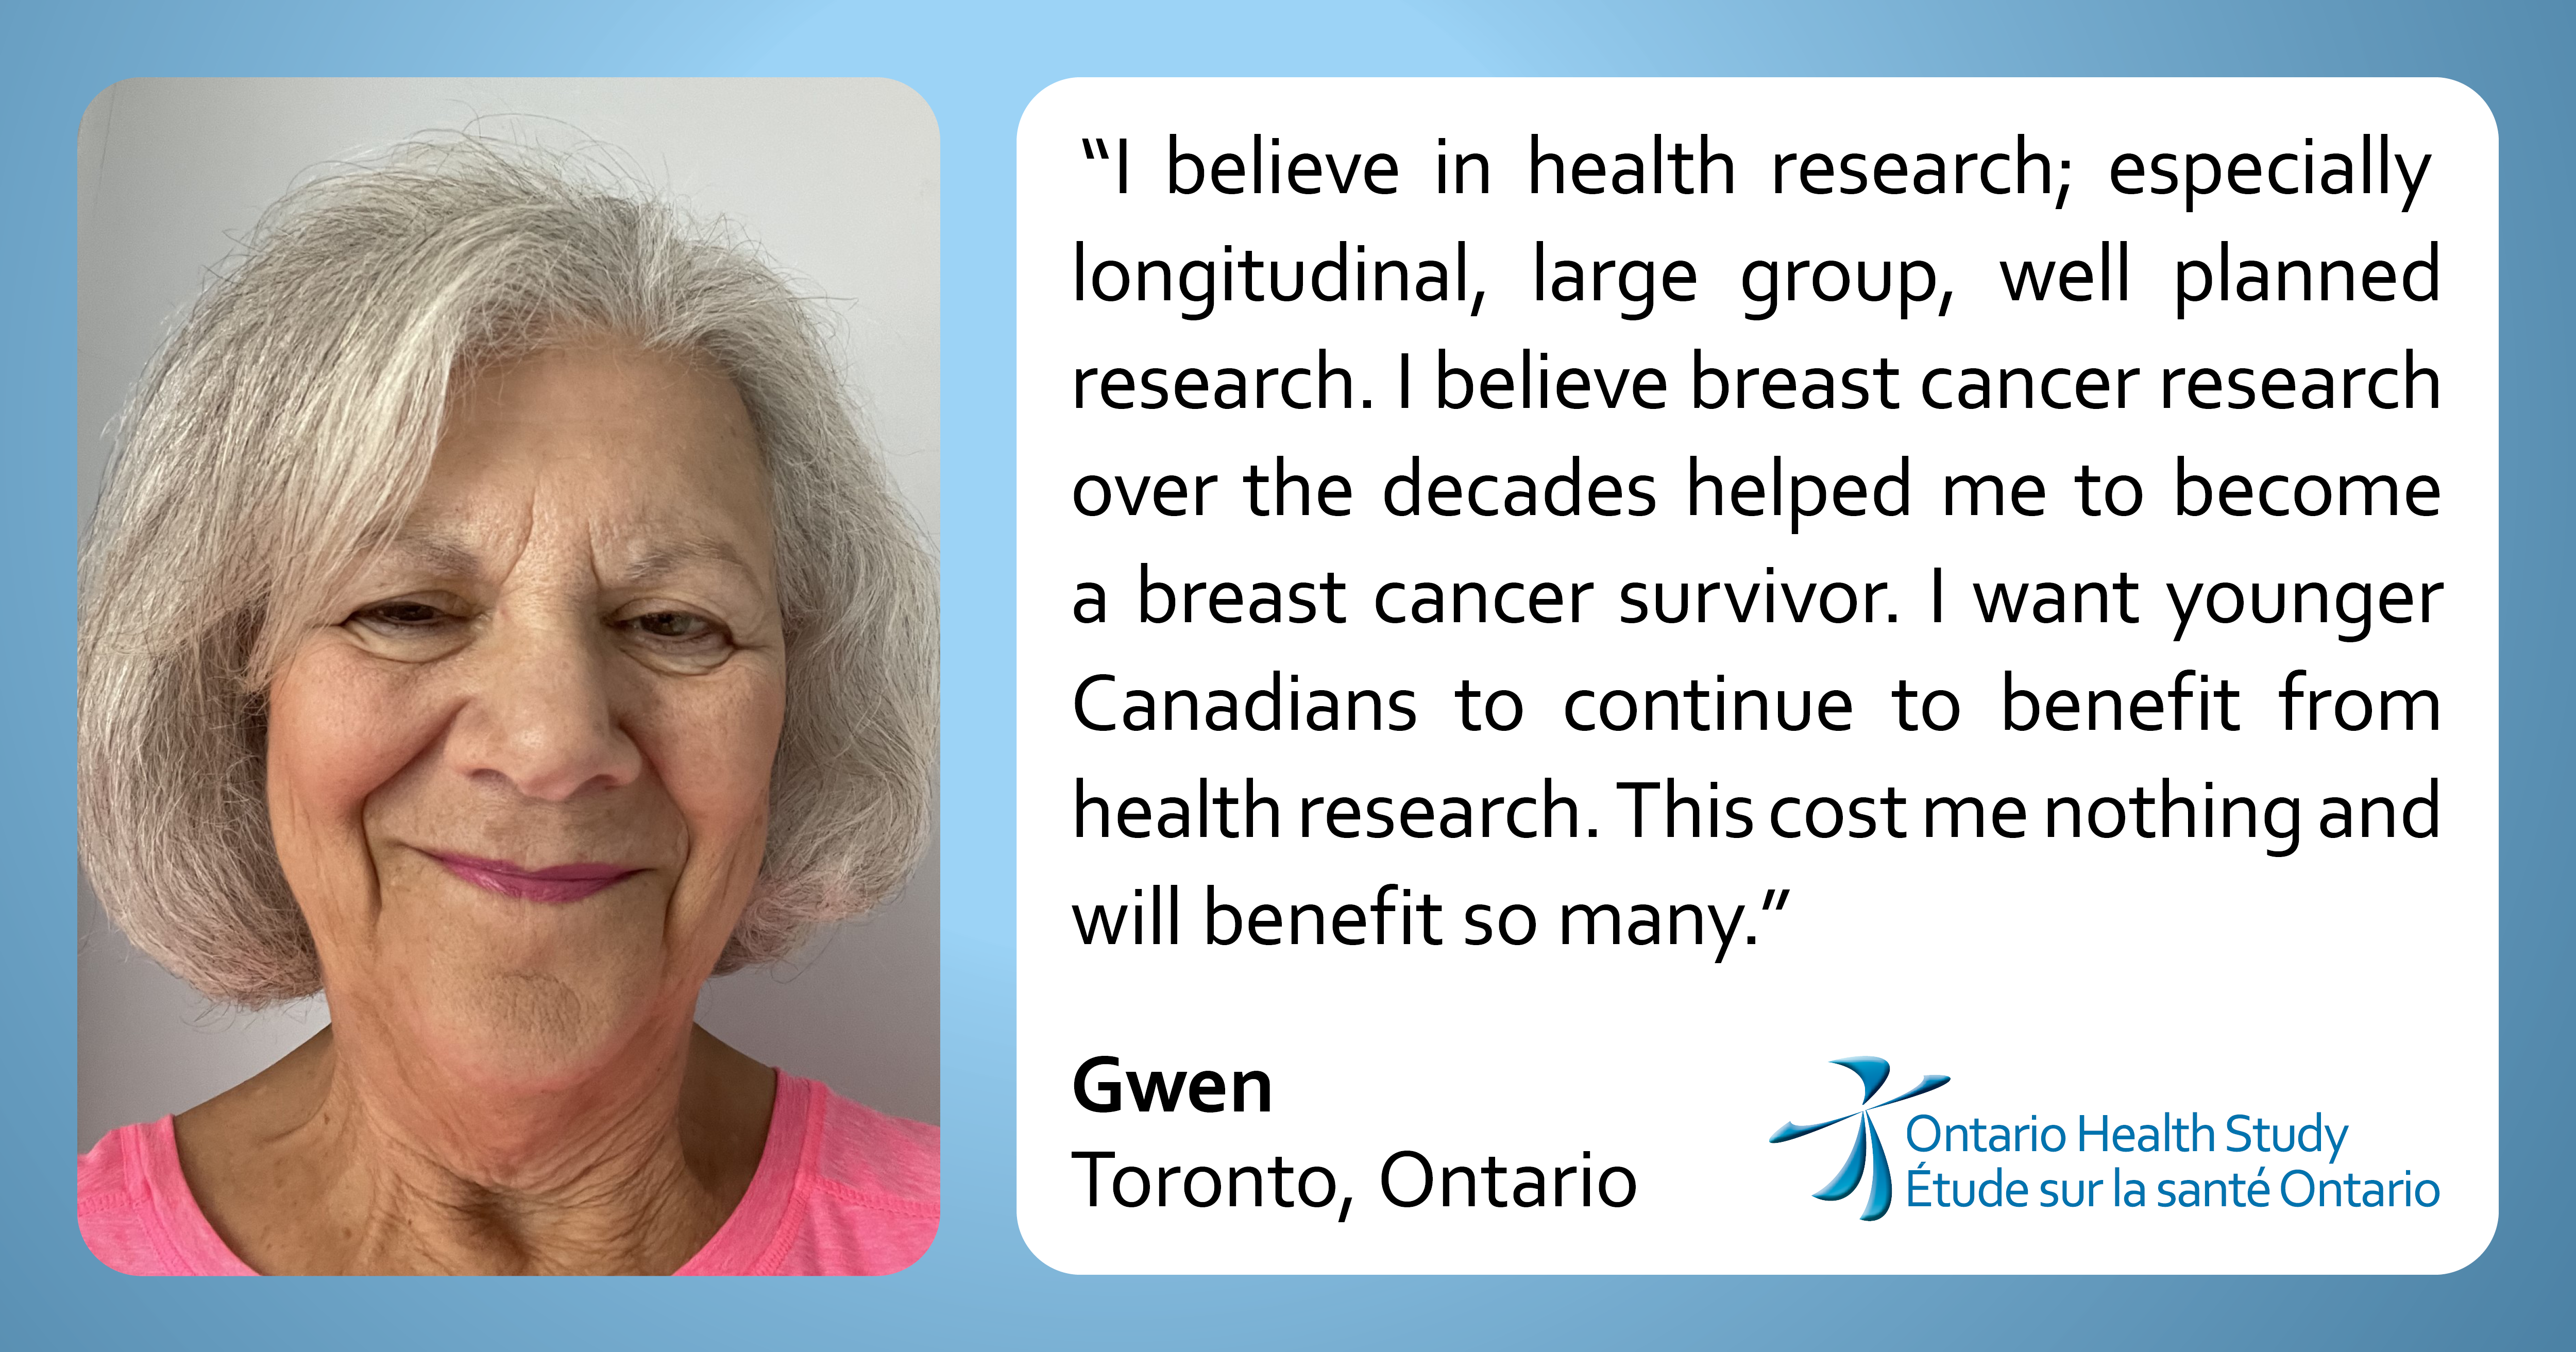 “I believe in health research; especially longitudinal, large group, well planned research.  I believe breast cancer research over the decades helped me to become a breast cancer survivor. I want younger Canadians to continue to benefit from health research. This cost me nothing and will benefit so many.”